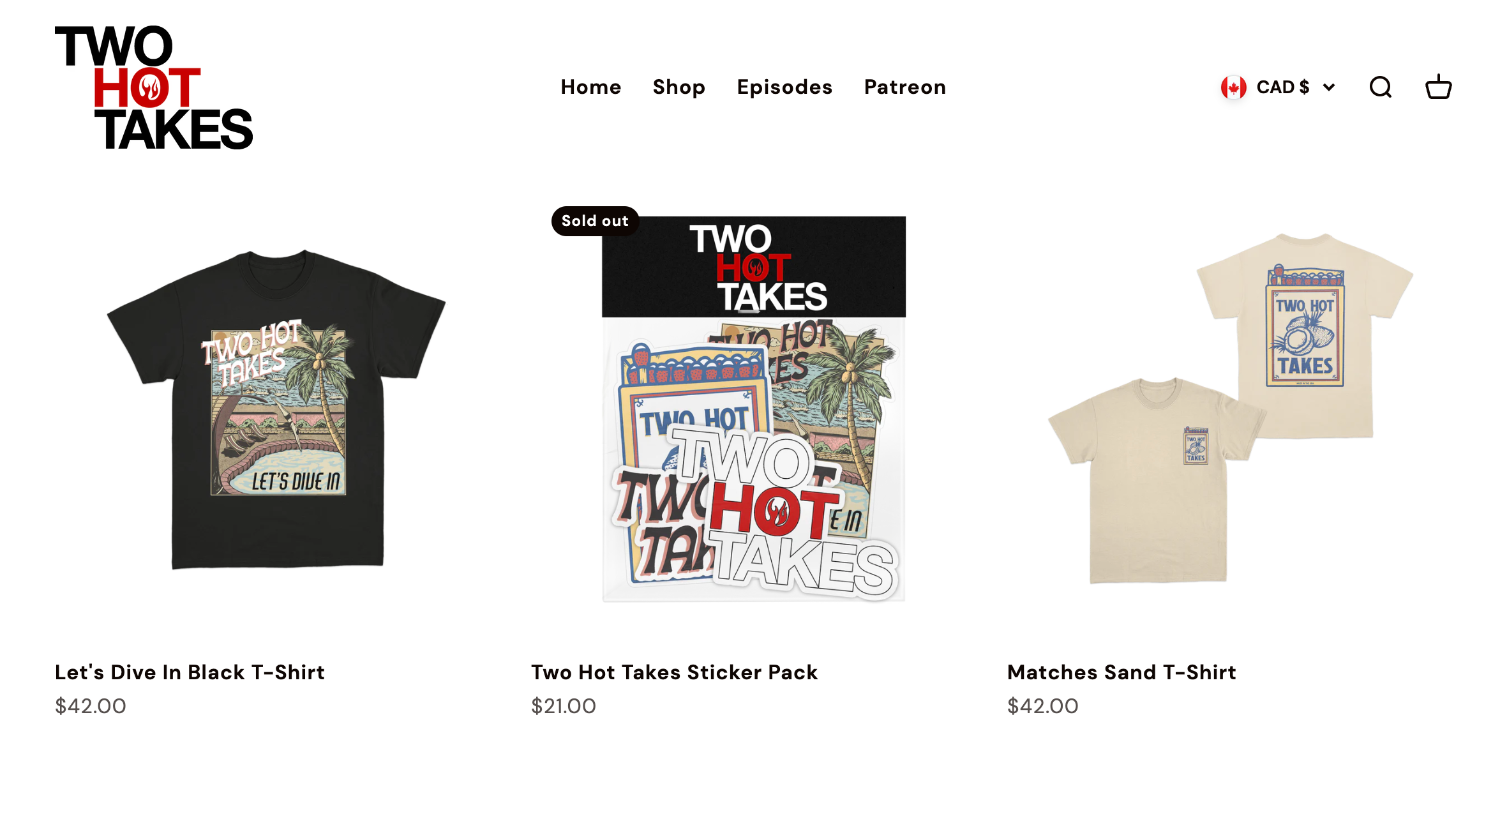 Ecommerce product page for YouTube channel Two Hot Takes